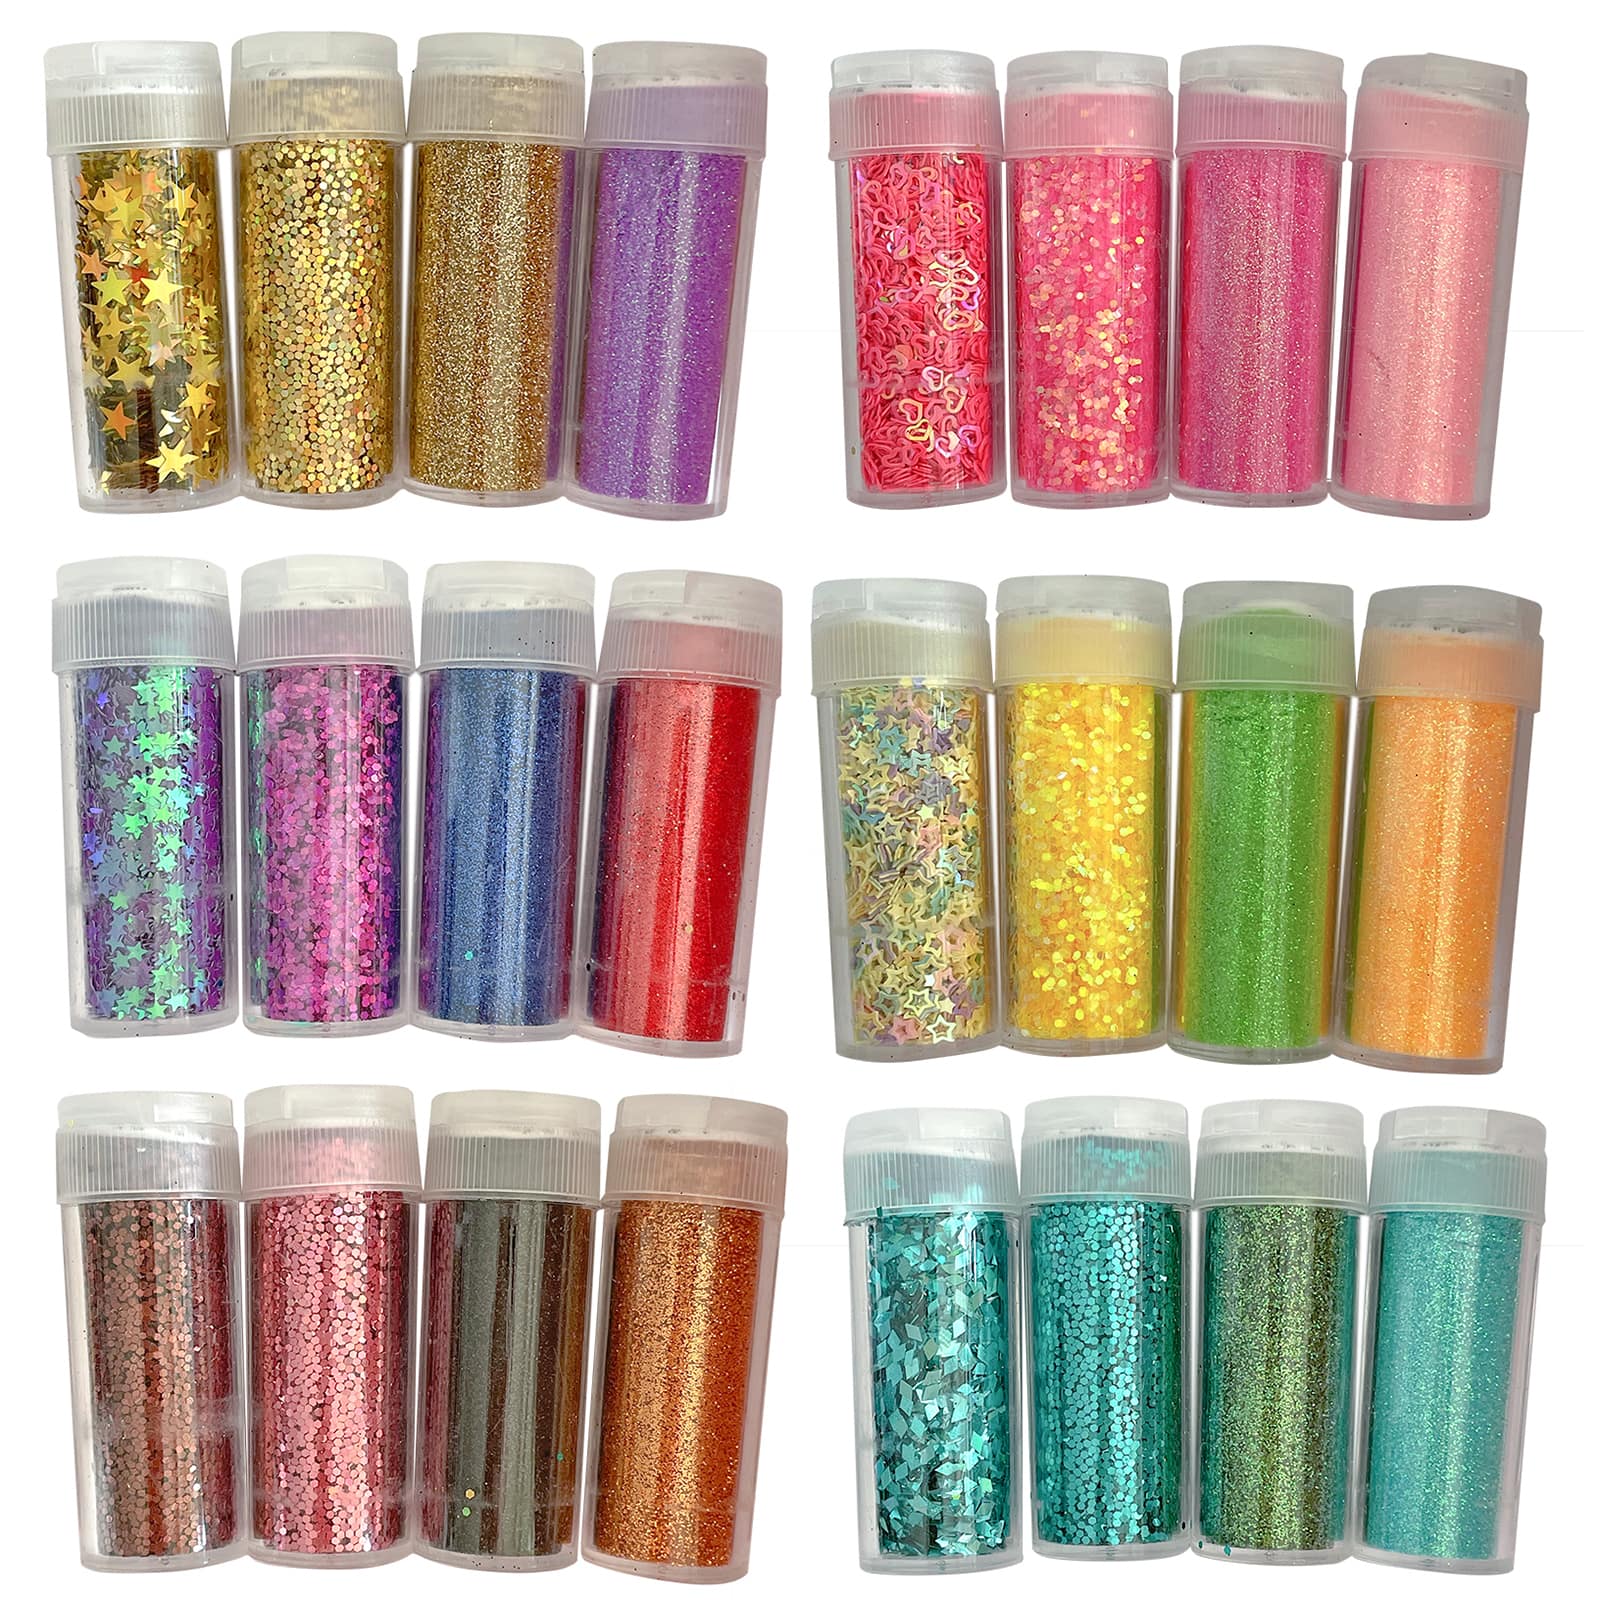 Assorted Glitter Glue by Recollections™, 1pc.